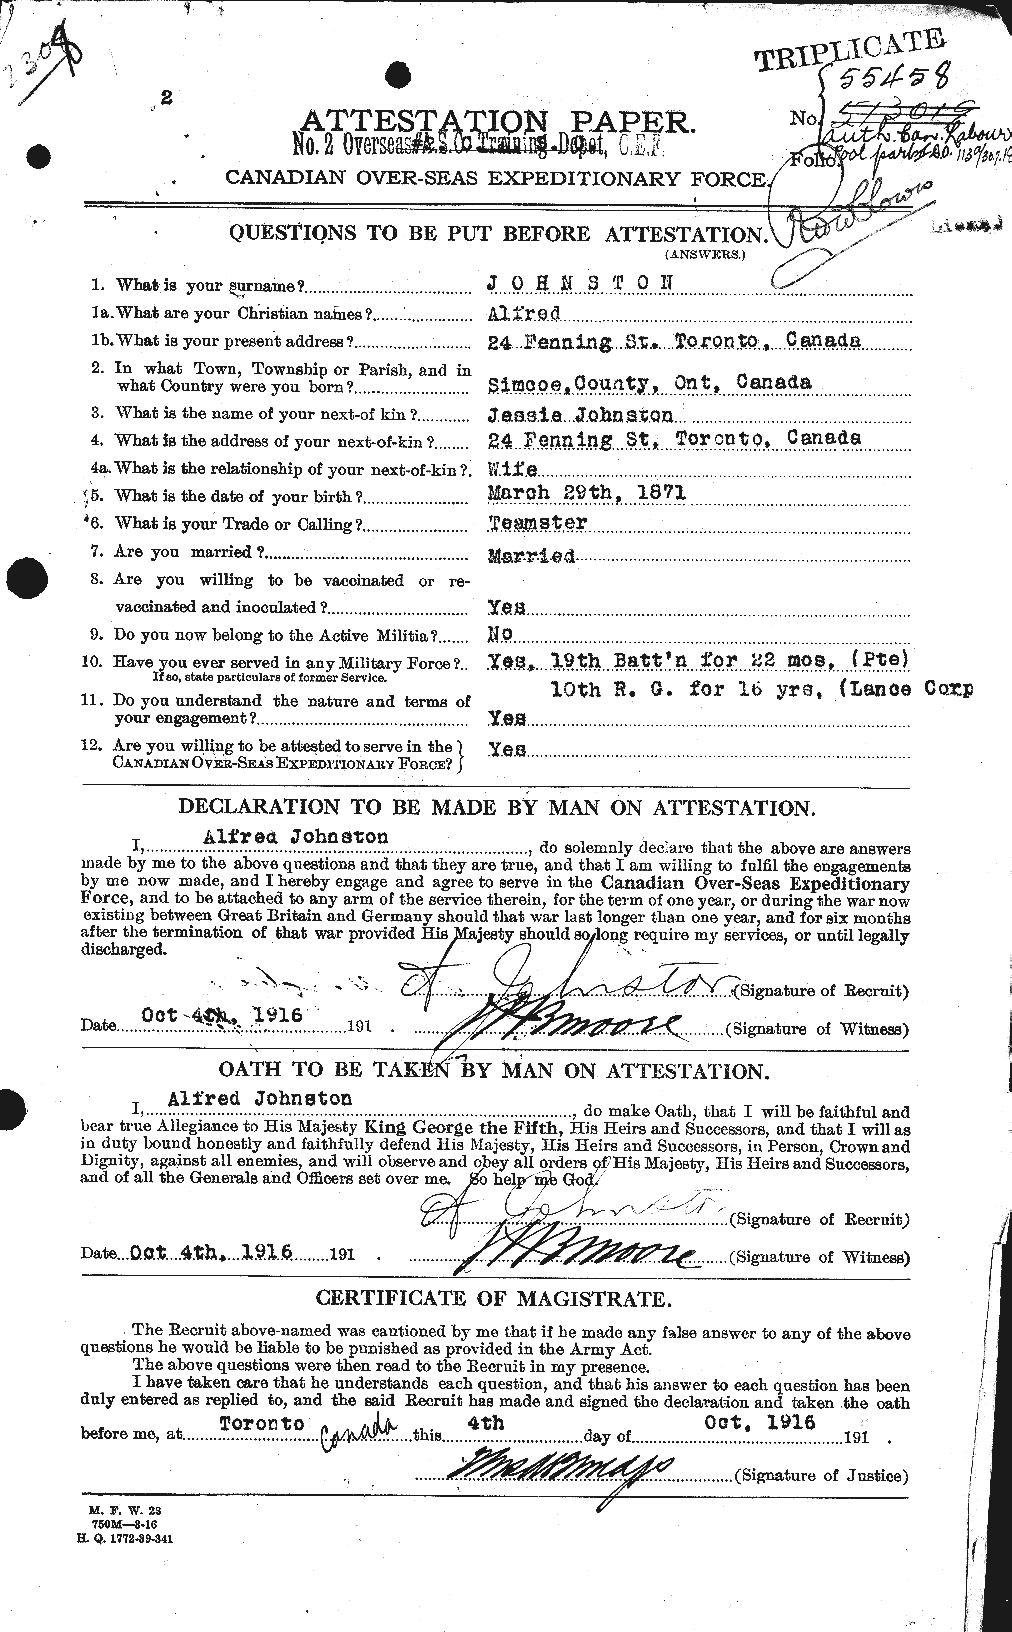 Personnel Records of the First World War - CEF 420984a